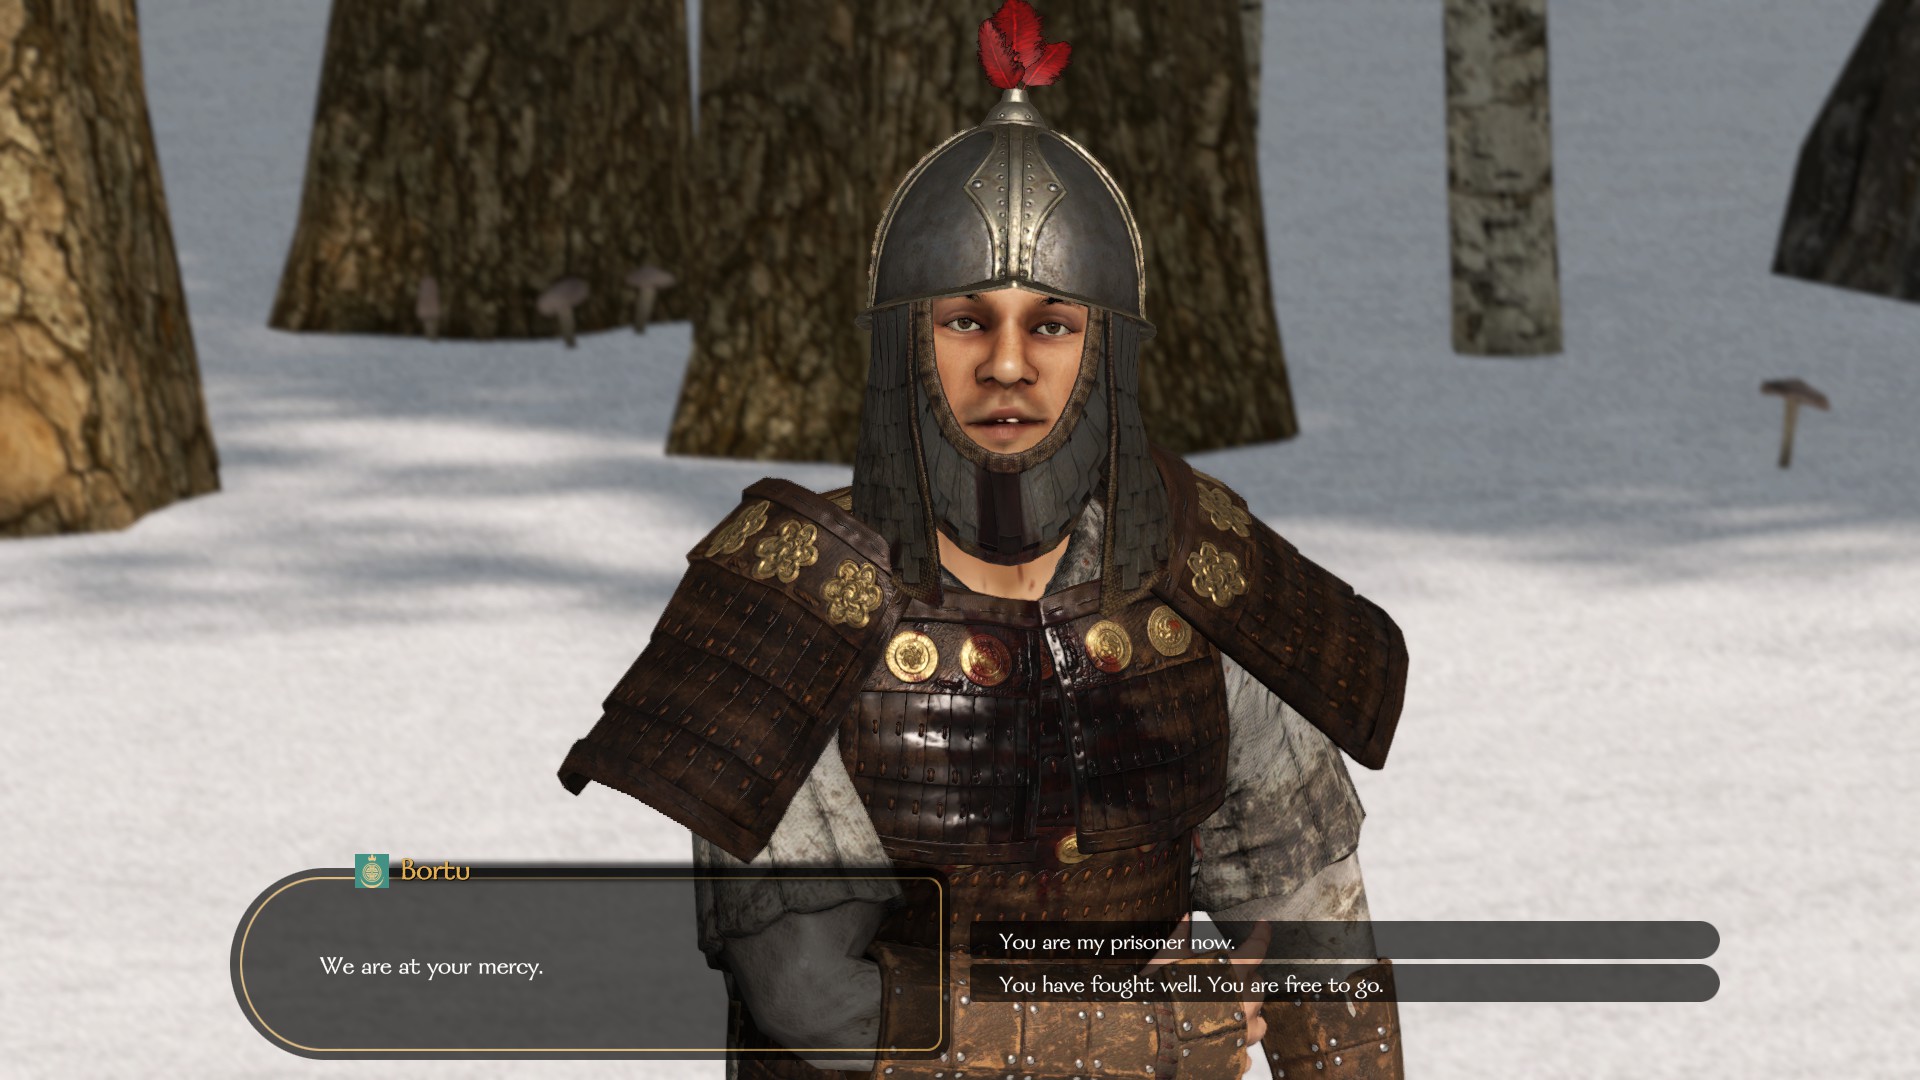 mount and blade sell prisoners